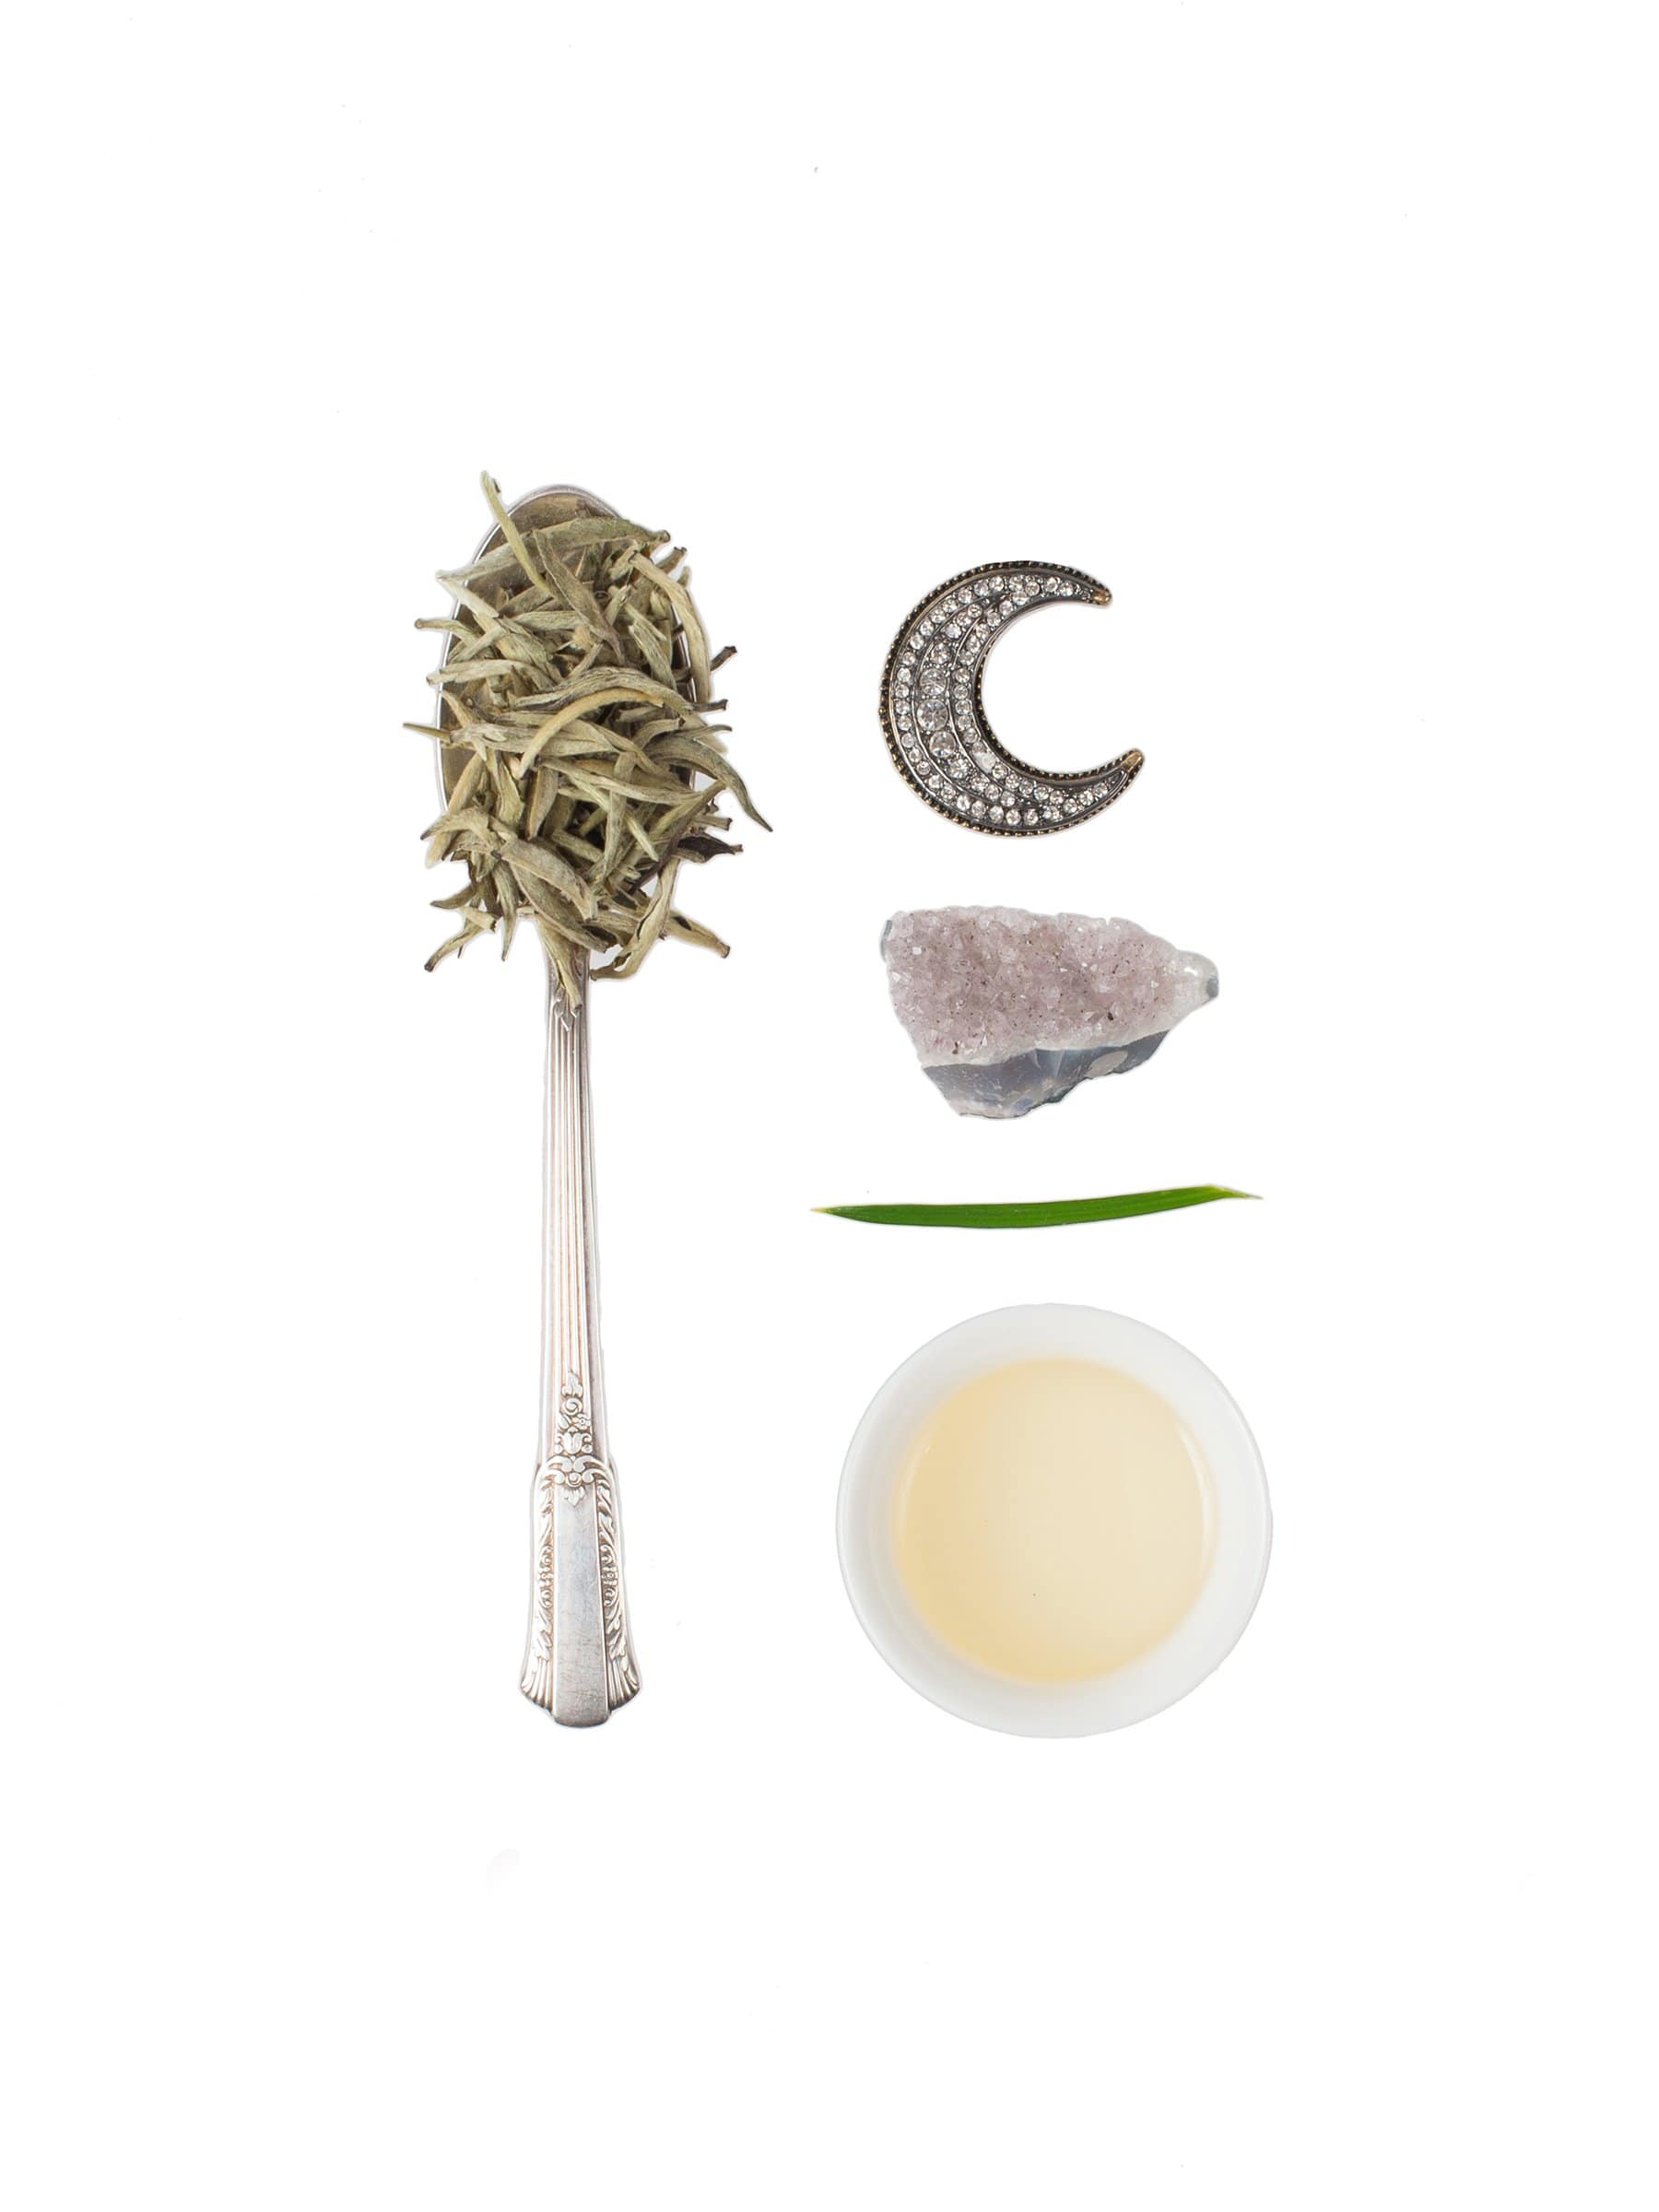 A flat-lay image shows a silver spoon filled with loose leaf tea, a crescent moon-shaped pendant, a raw amethyst crystal, a green leaf blade, and a small white bowl containing Magic Hour's Jasmine Moon White Tea of Reverence, all arranged on a white background.